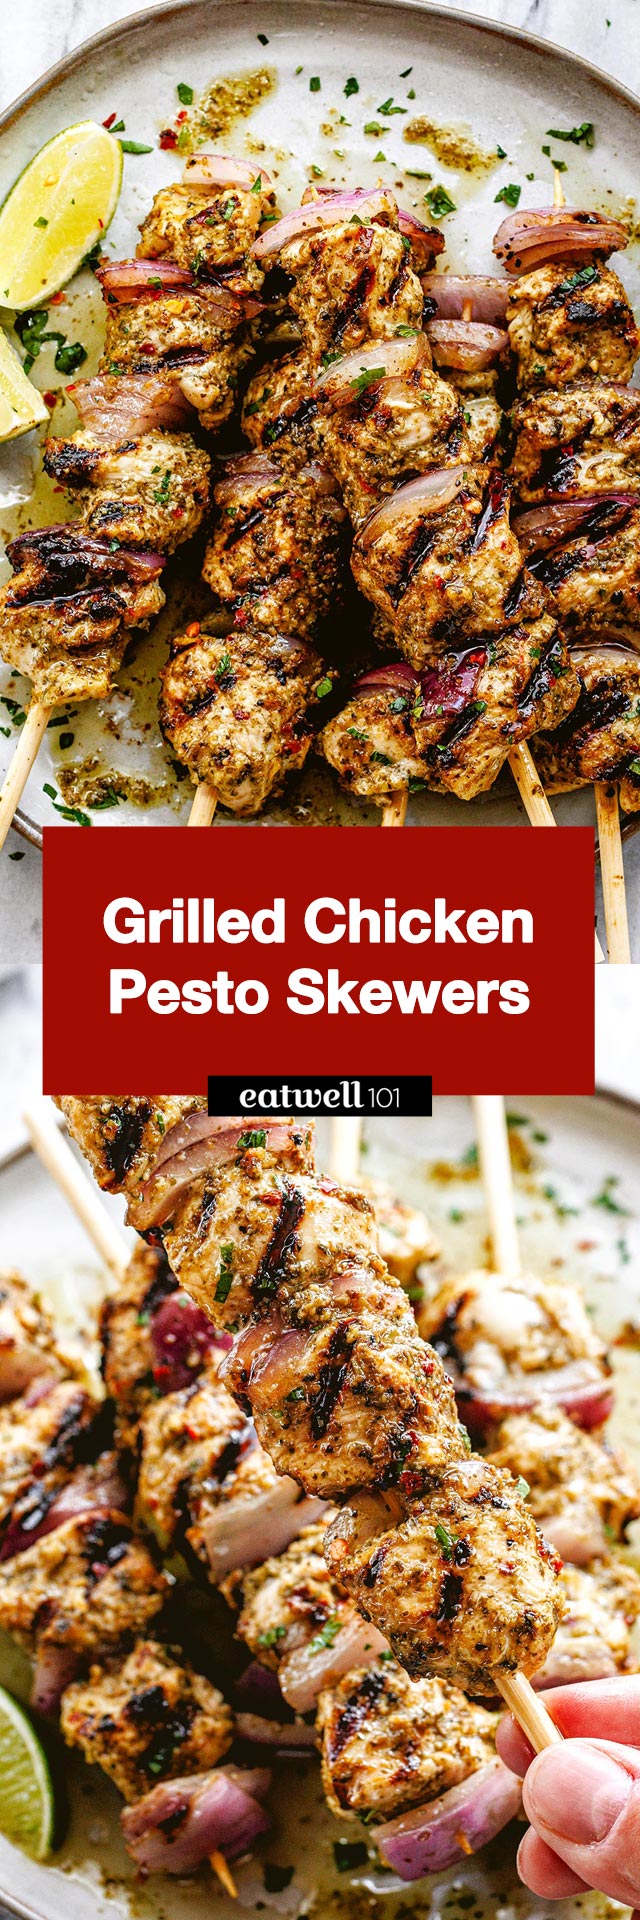 Chicken Pesto Skewers Recipe - #grilled #chicken #recipe #eatwell101 - These grilled chicken breast marinated in pesto are an easy way to enjoy a healthy, flavorful chicken dinner. Get your grill fired up, and get ready for some delicious grilled chicken pesto skewers! 